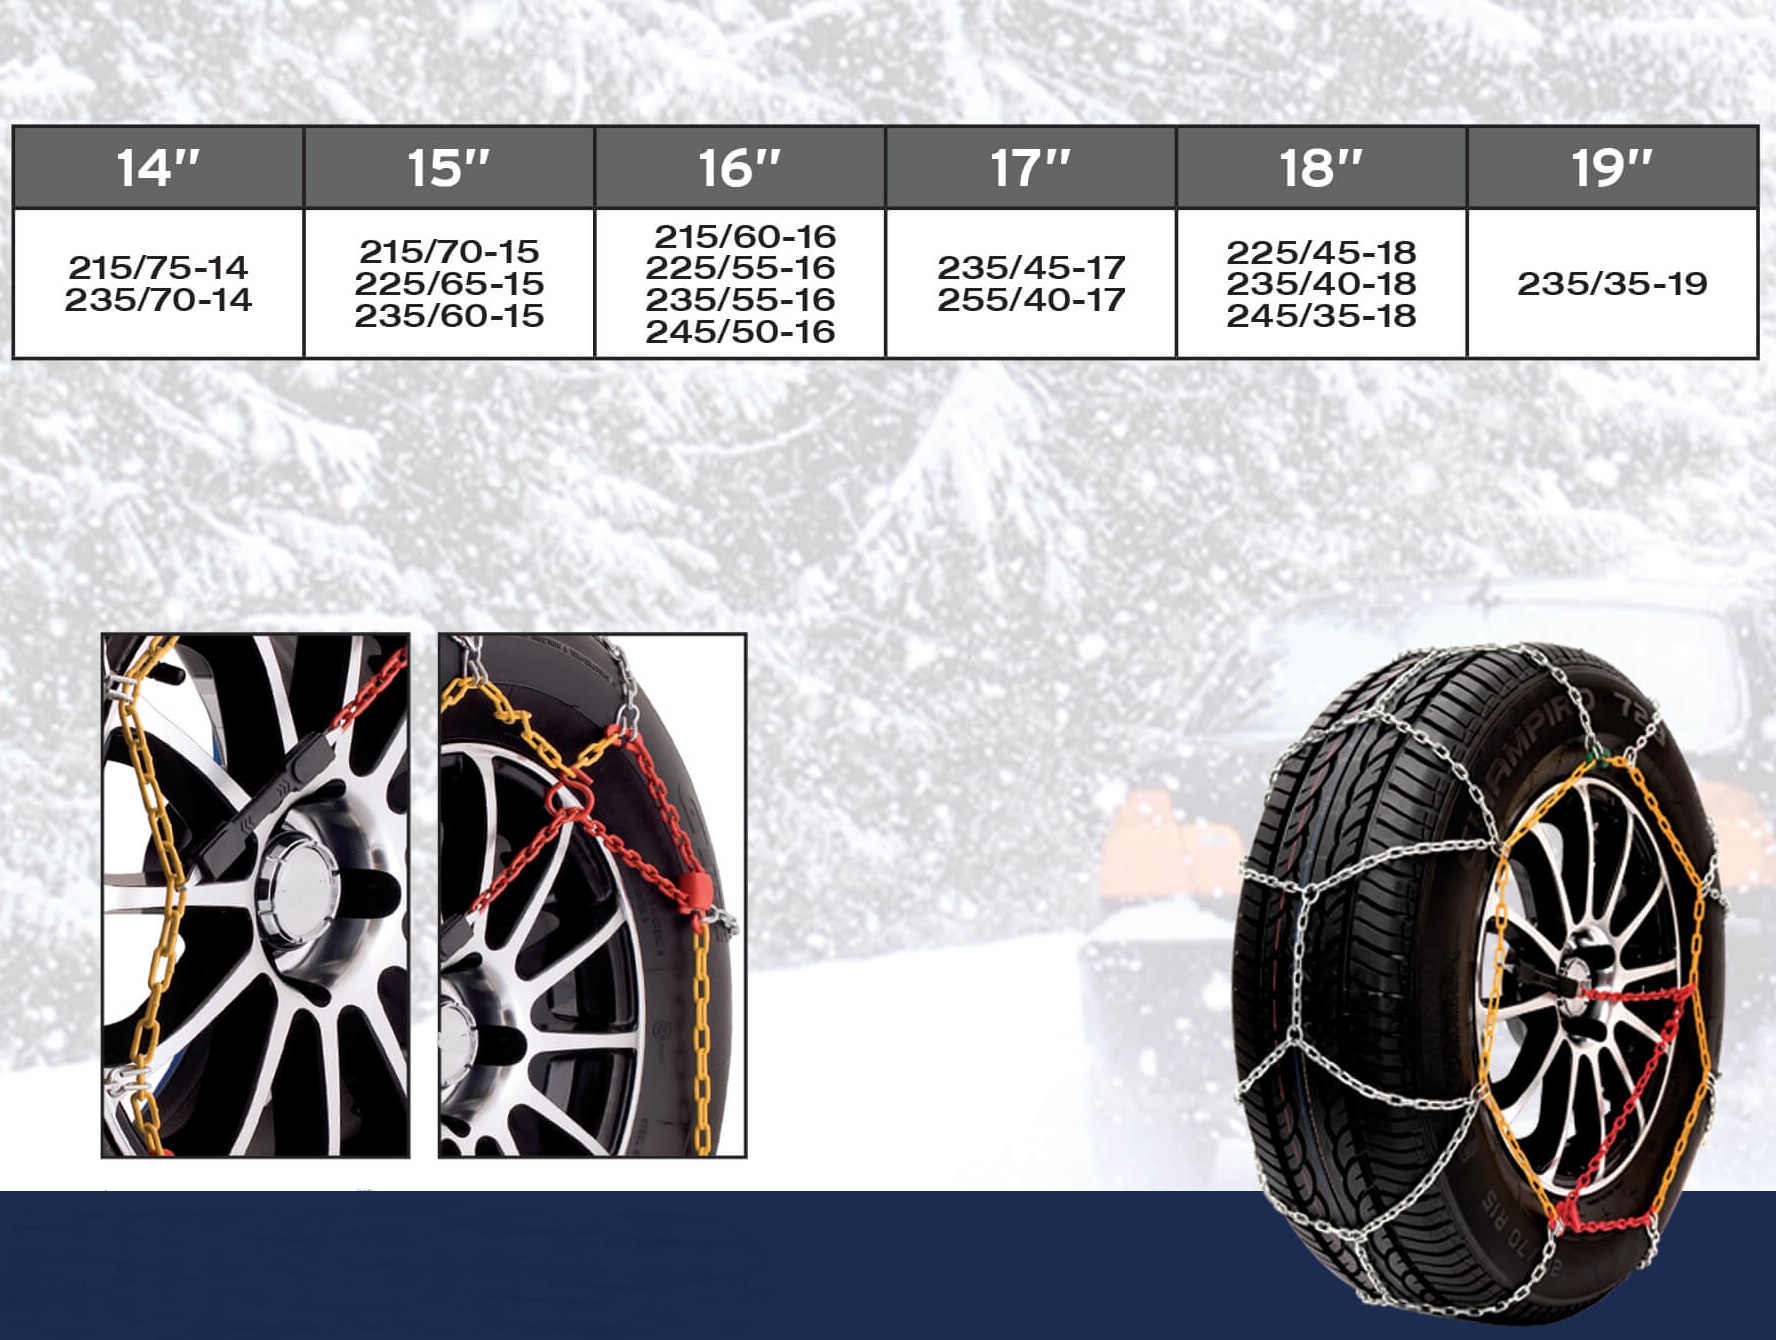 Chaines neige manuelle 9mm 235/70 R16 - 235 70 16 - 235 70 R16